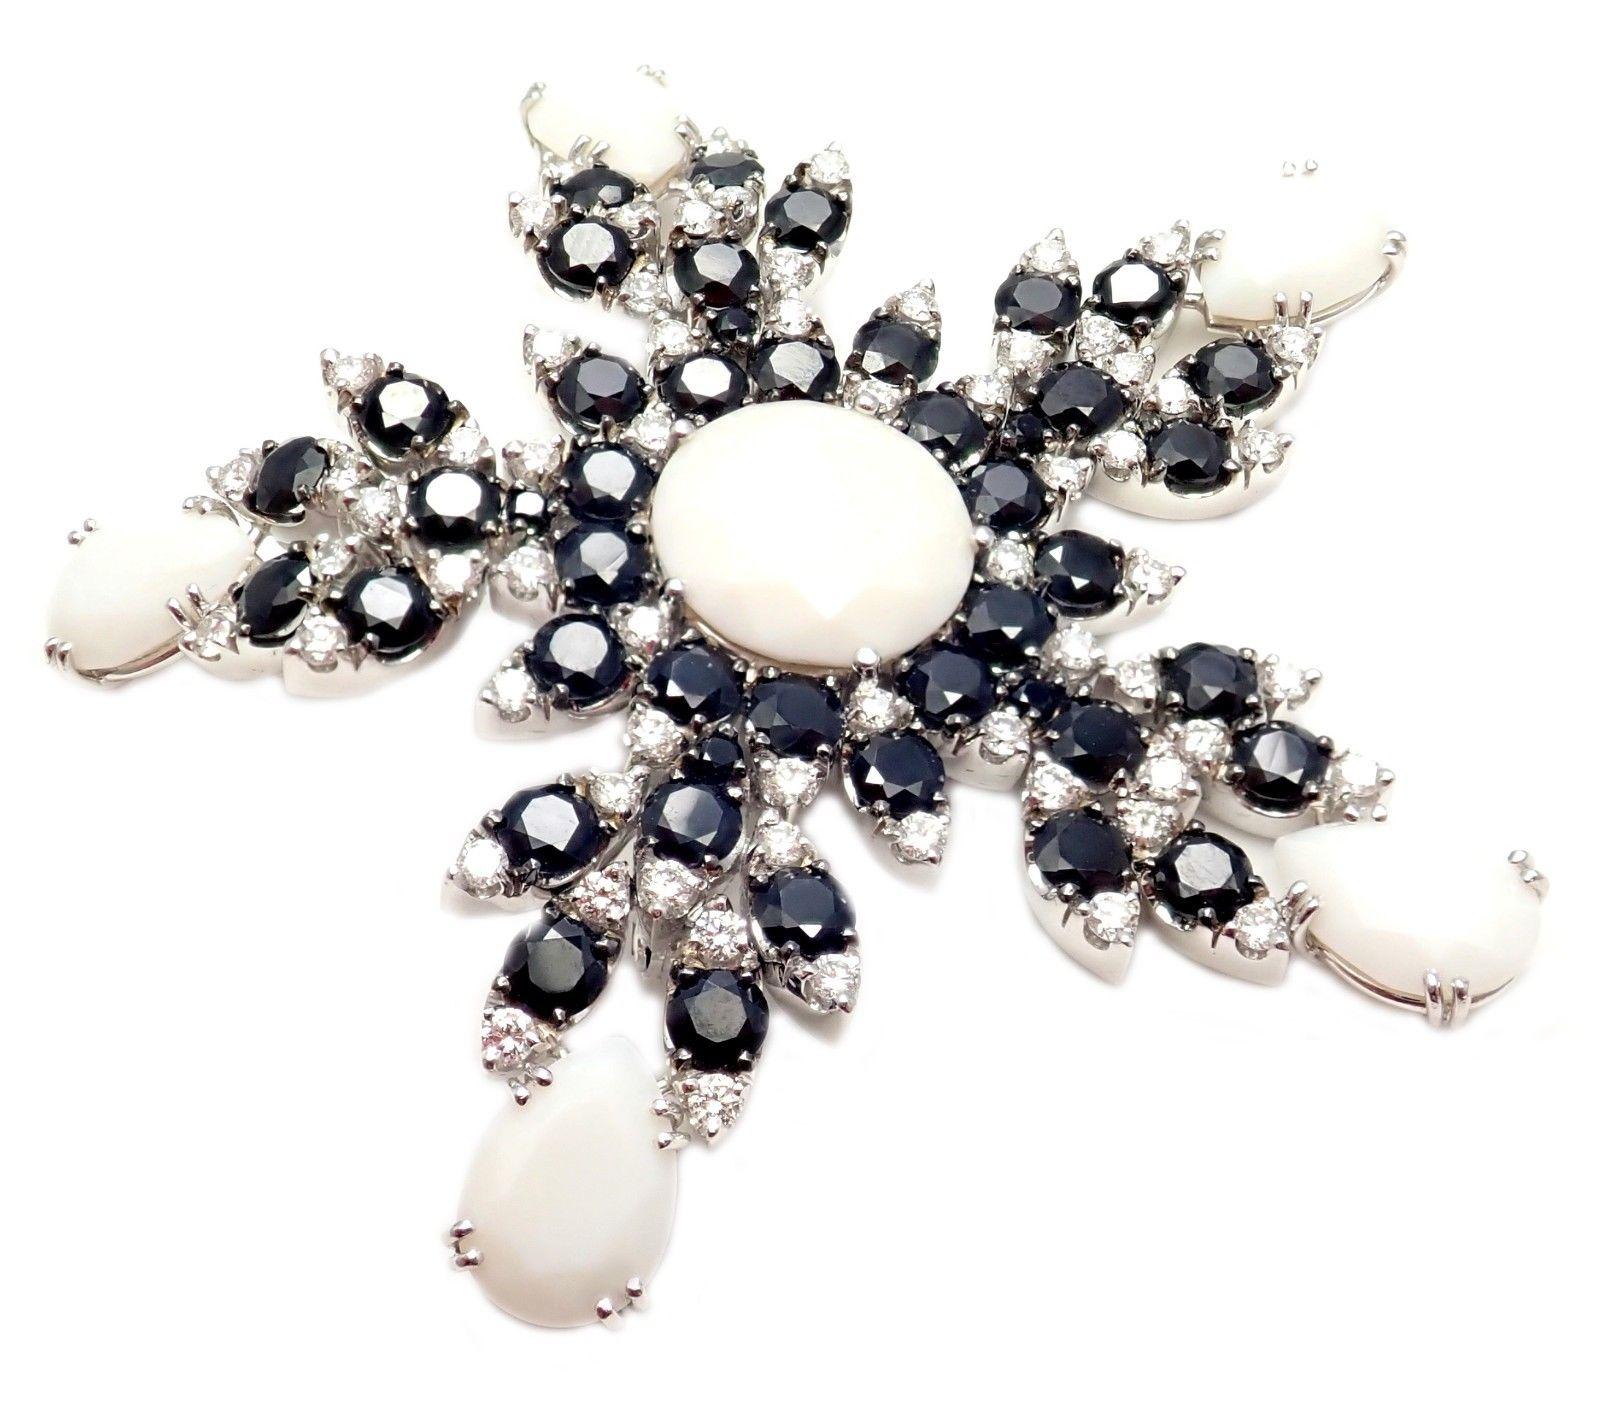 18k White Gold Diamond White Kogolong Sapphires Ghirlanda 70 Queen Pin Brooch by Pasquale Bruni.  
With White Kogolong: 29.54ctw
Diamonds: 2.26ctw
46x Blue Sapphires
This brooch come with Box, Certificate and Tag.  
Details:  
Measurements: 65mm x